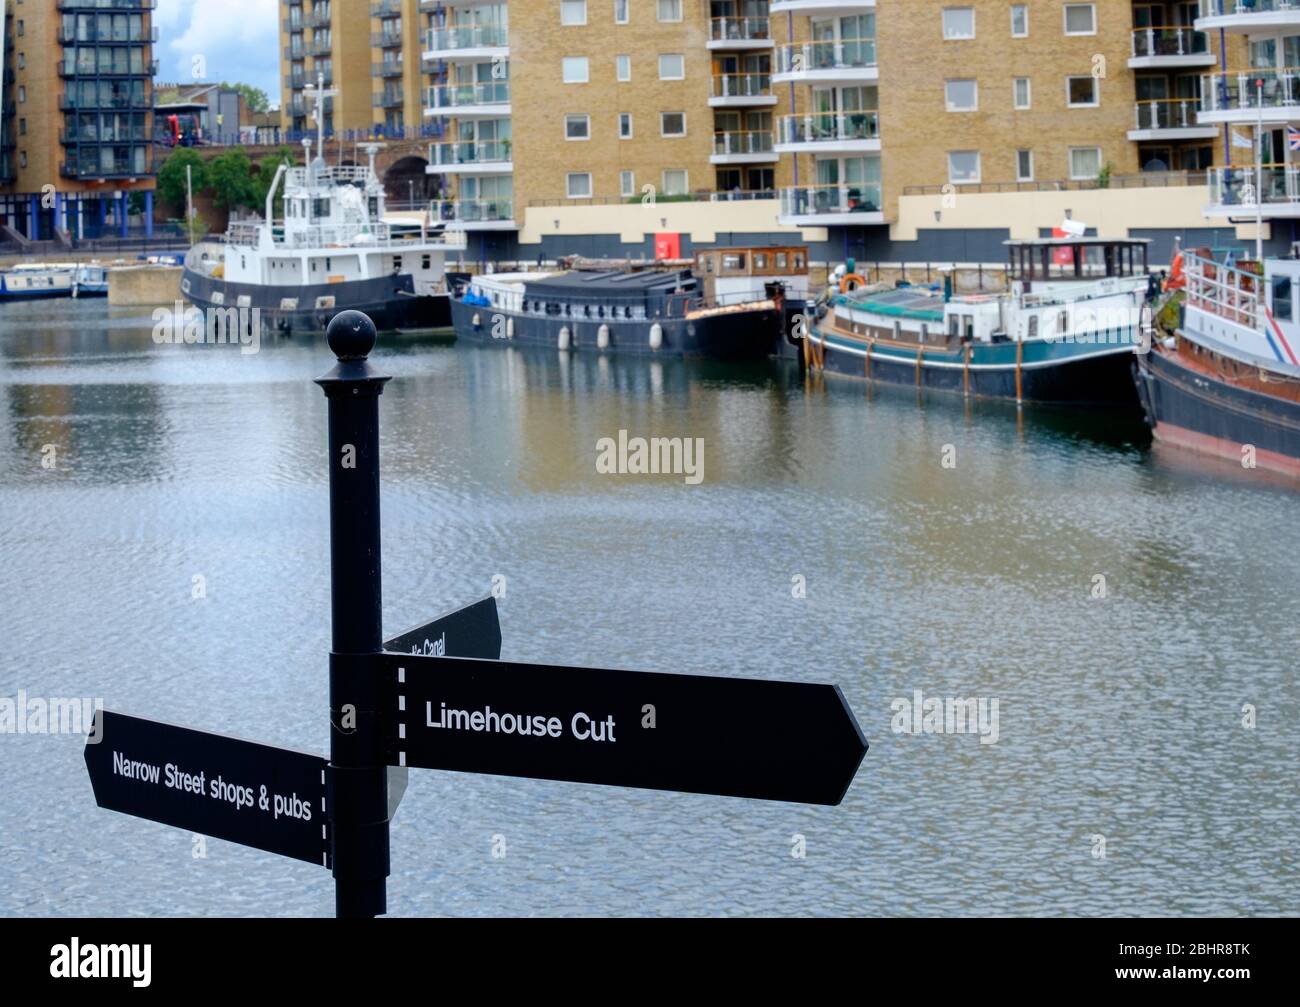 Signpost for Limehouse Cut & Narrow Street Shops & Pubs with moored boats & residential high risers in background at Limehouse Marina, East London, UK Stock Photo